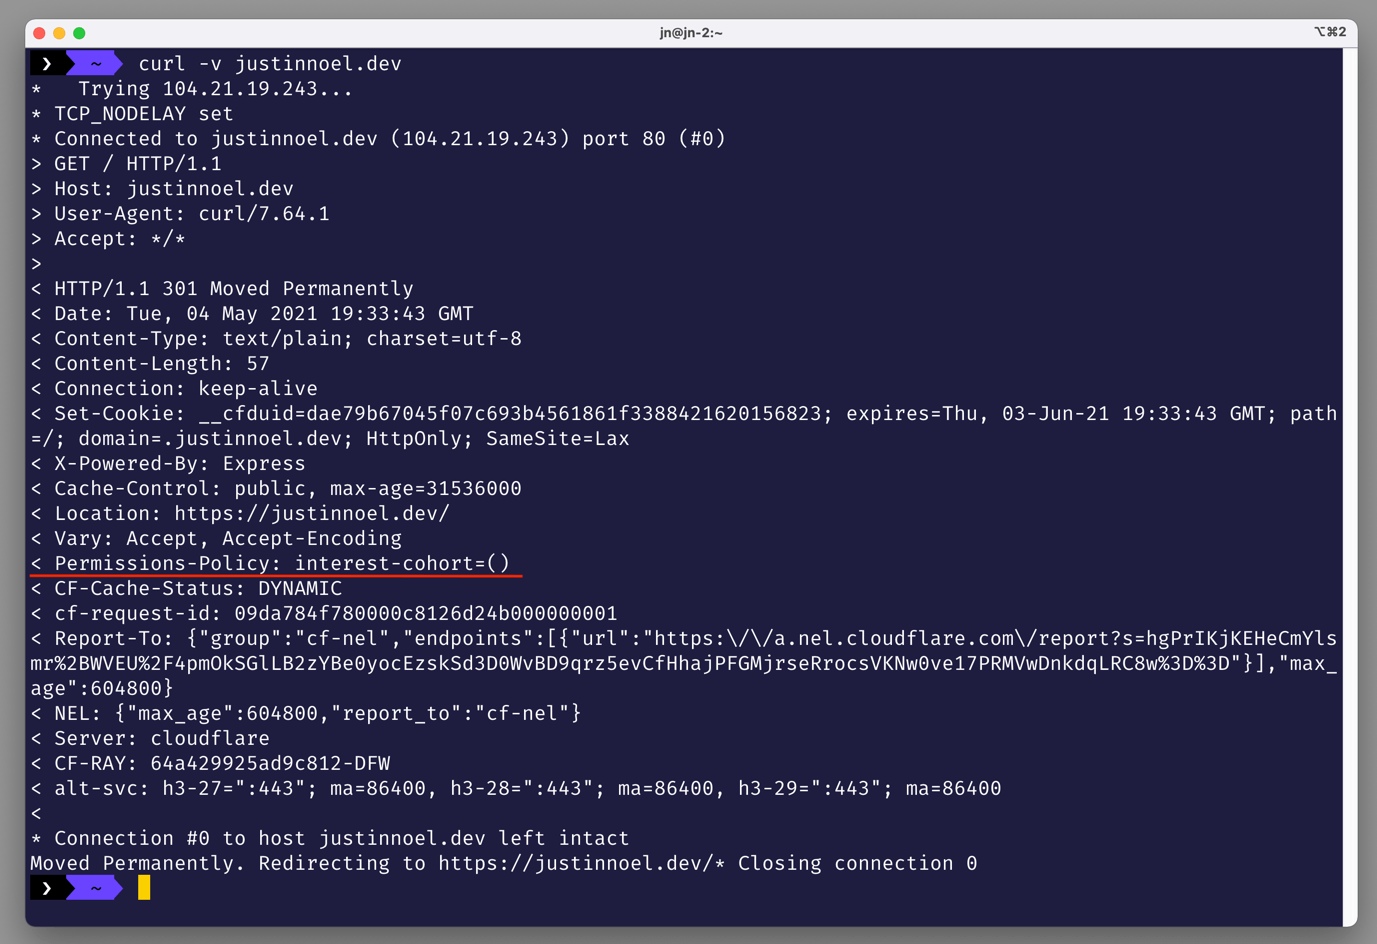 Screenshot of the "curl -v justinnoel.dev" command. Shows the new "permissions-policy" header.